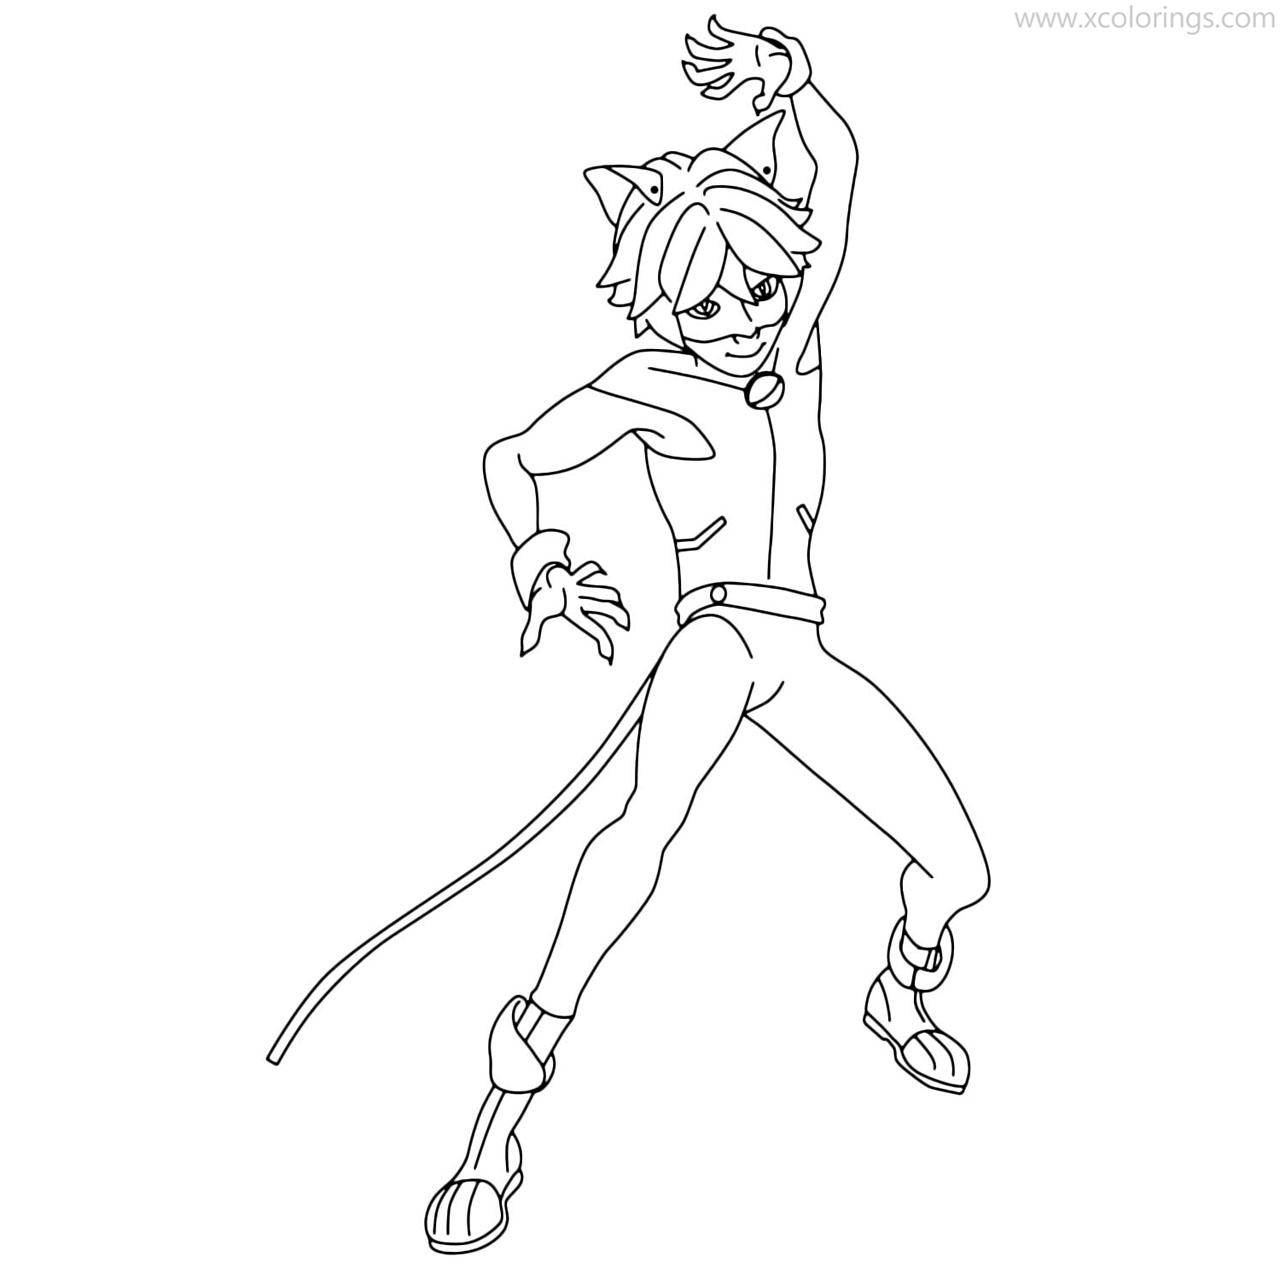 Miraculous Ladybug Coloring Pages Character Adrien Agreste - Xcolorings.com